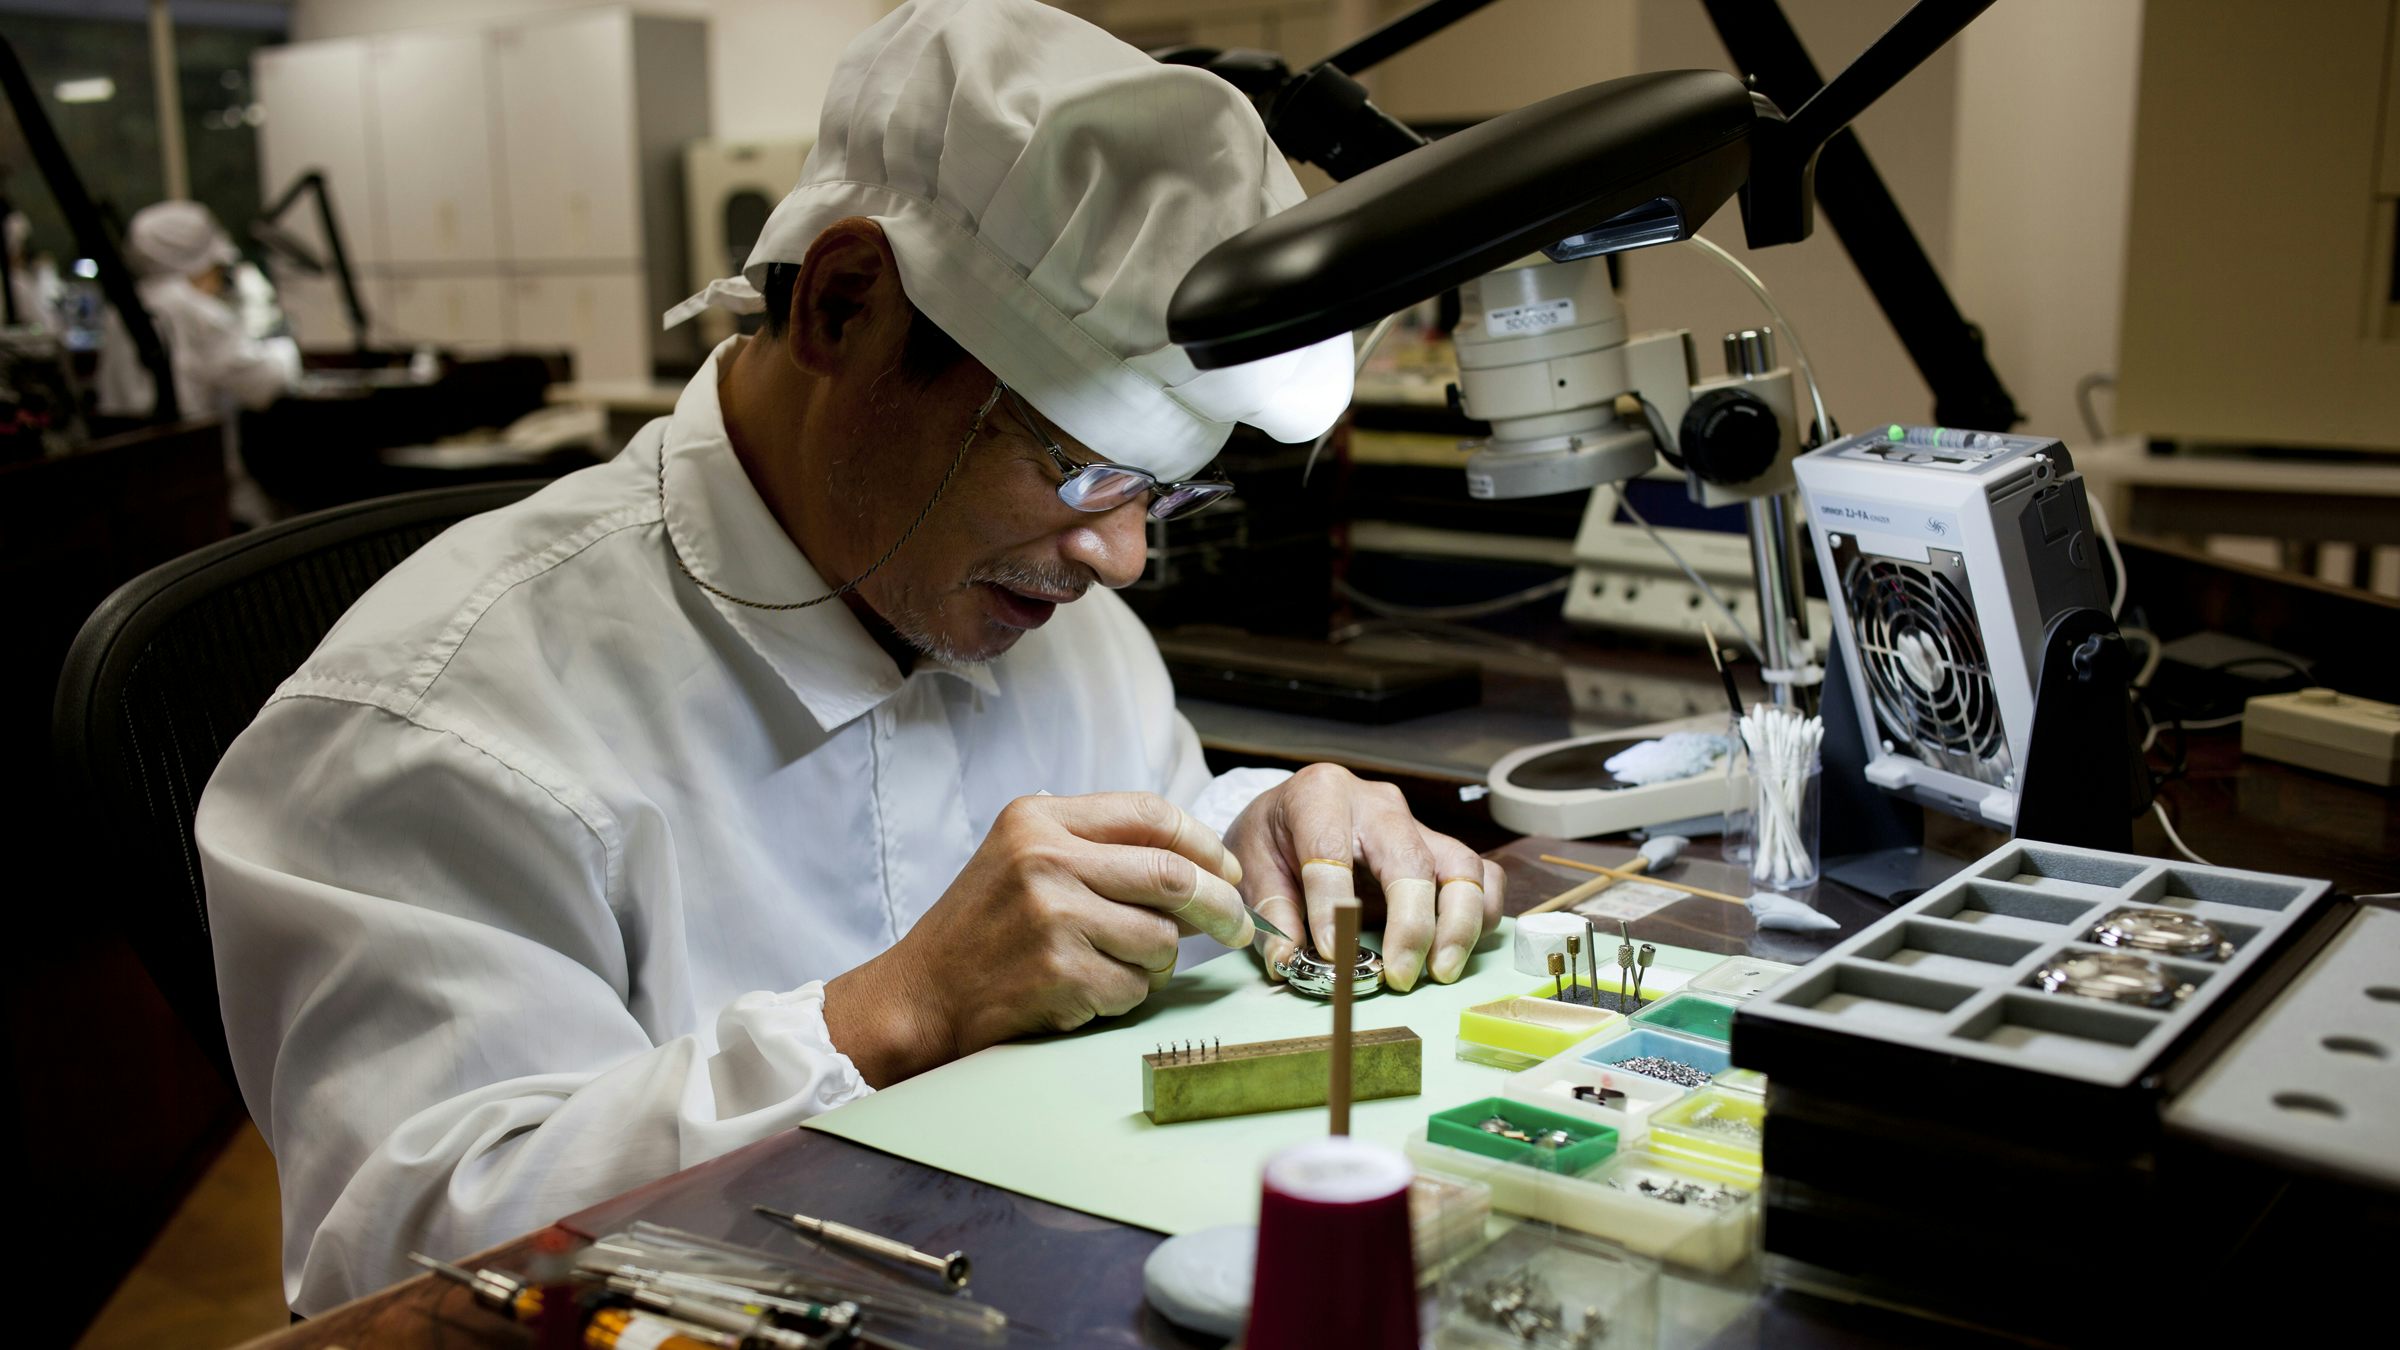 Inside The Manufacture: A Visit To Seiko Japan (Video) - Hodinkee